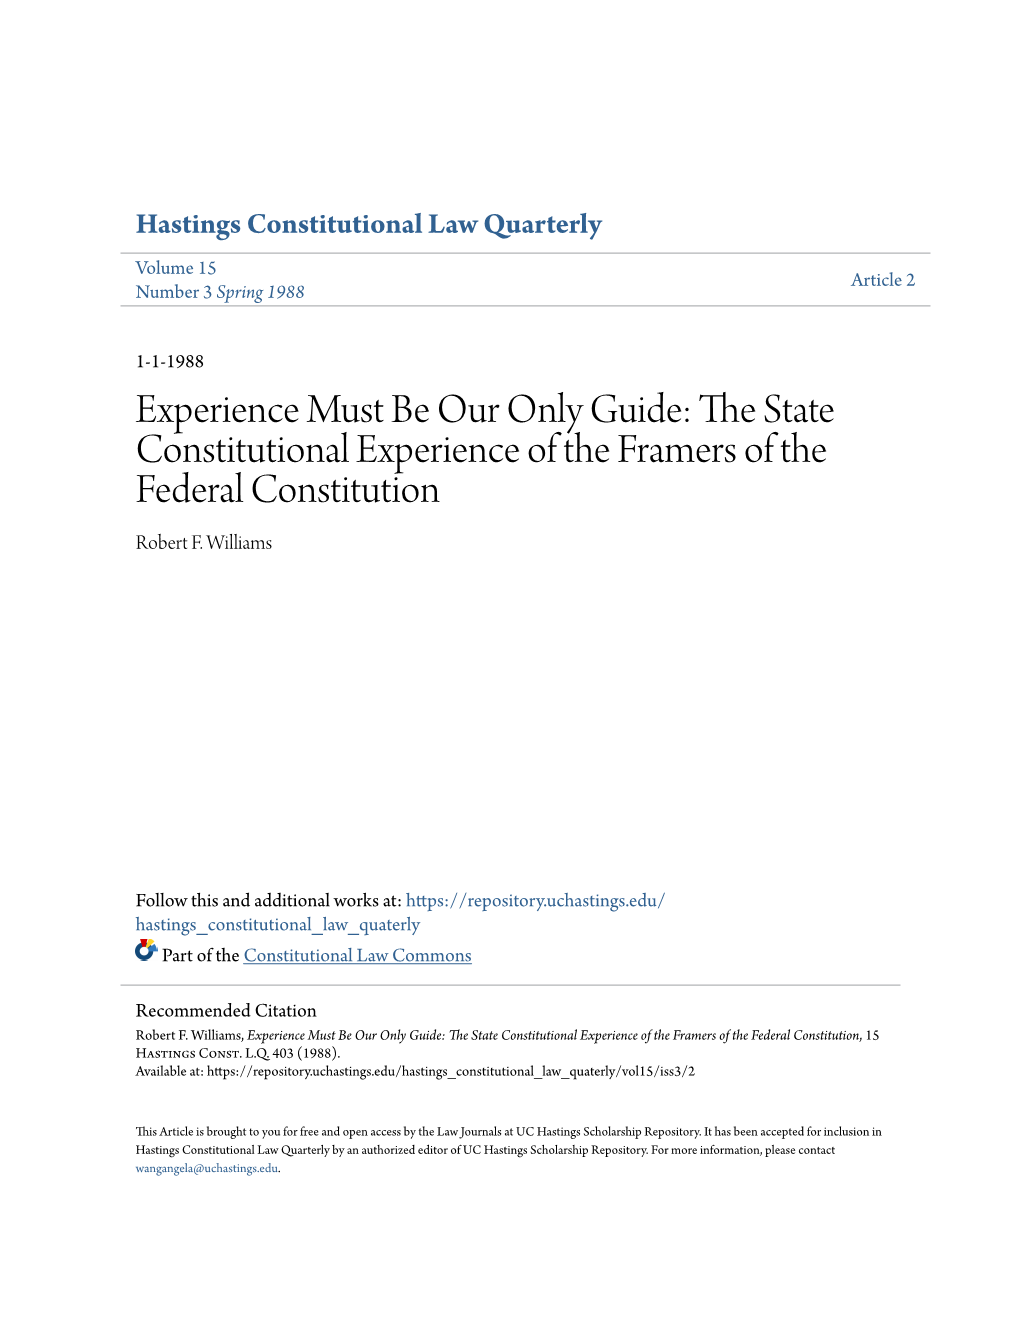 The State Constitutional Experience of the Framers of the Federal Constitution, 15 Hastings Const